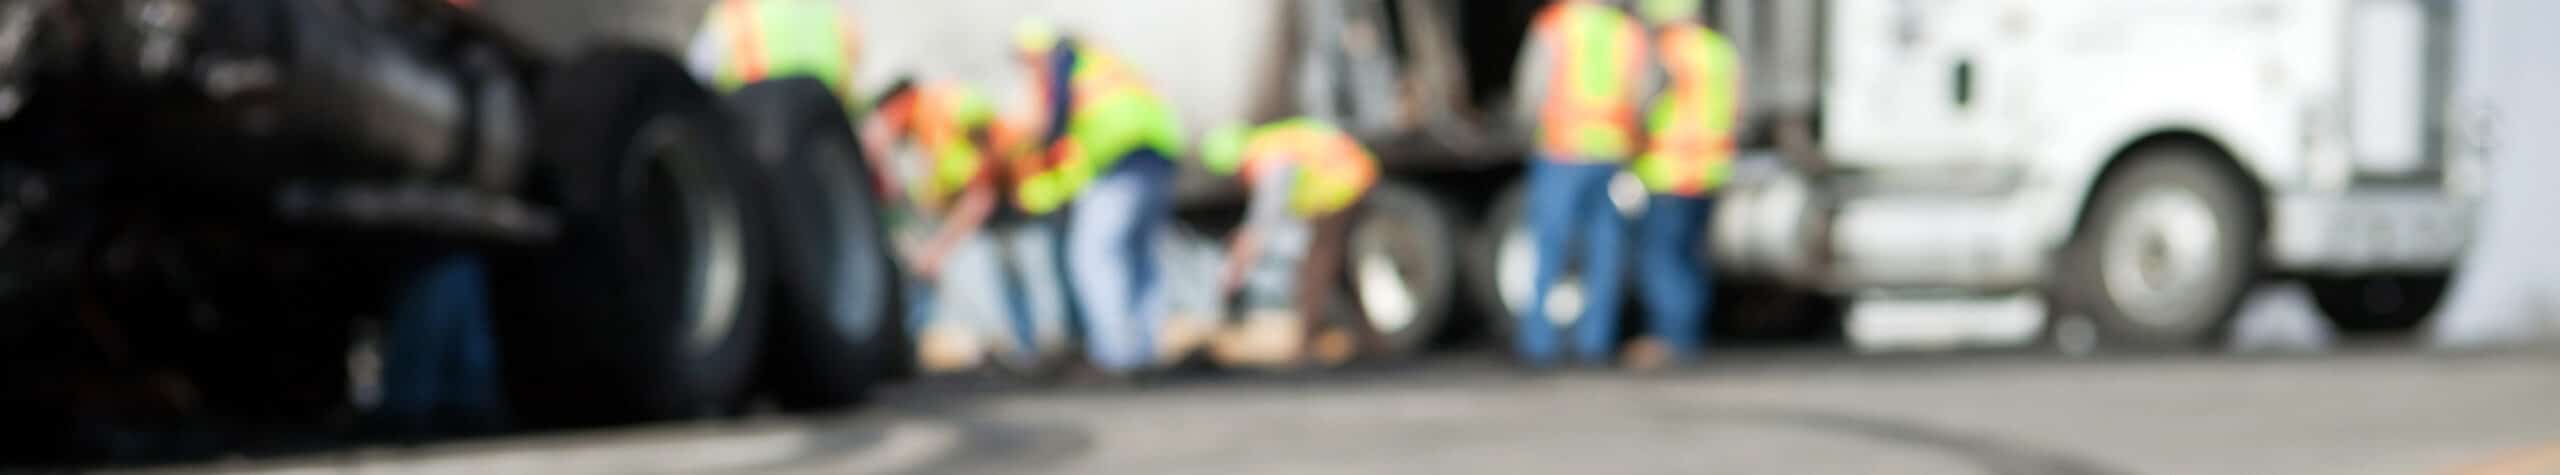 18 wheeler accident lawyer indianapolis